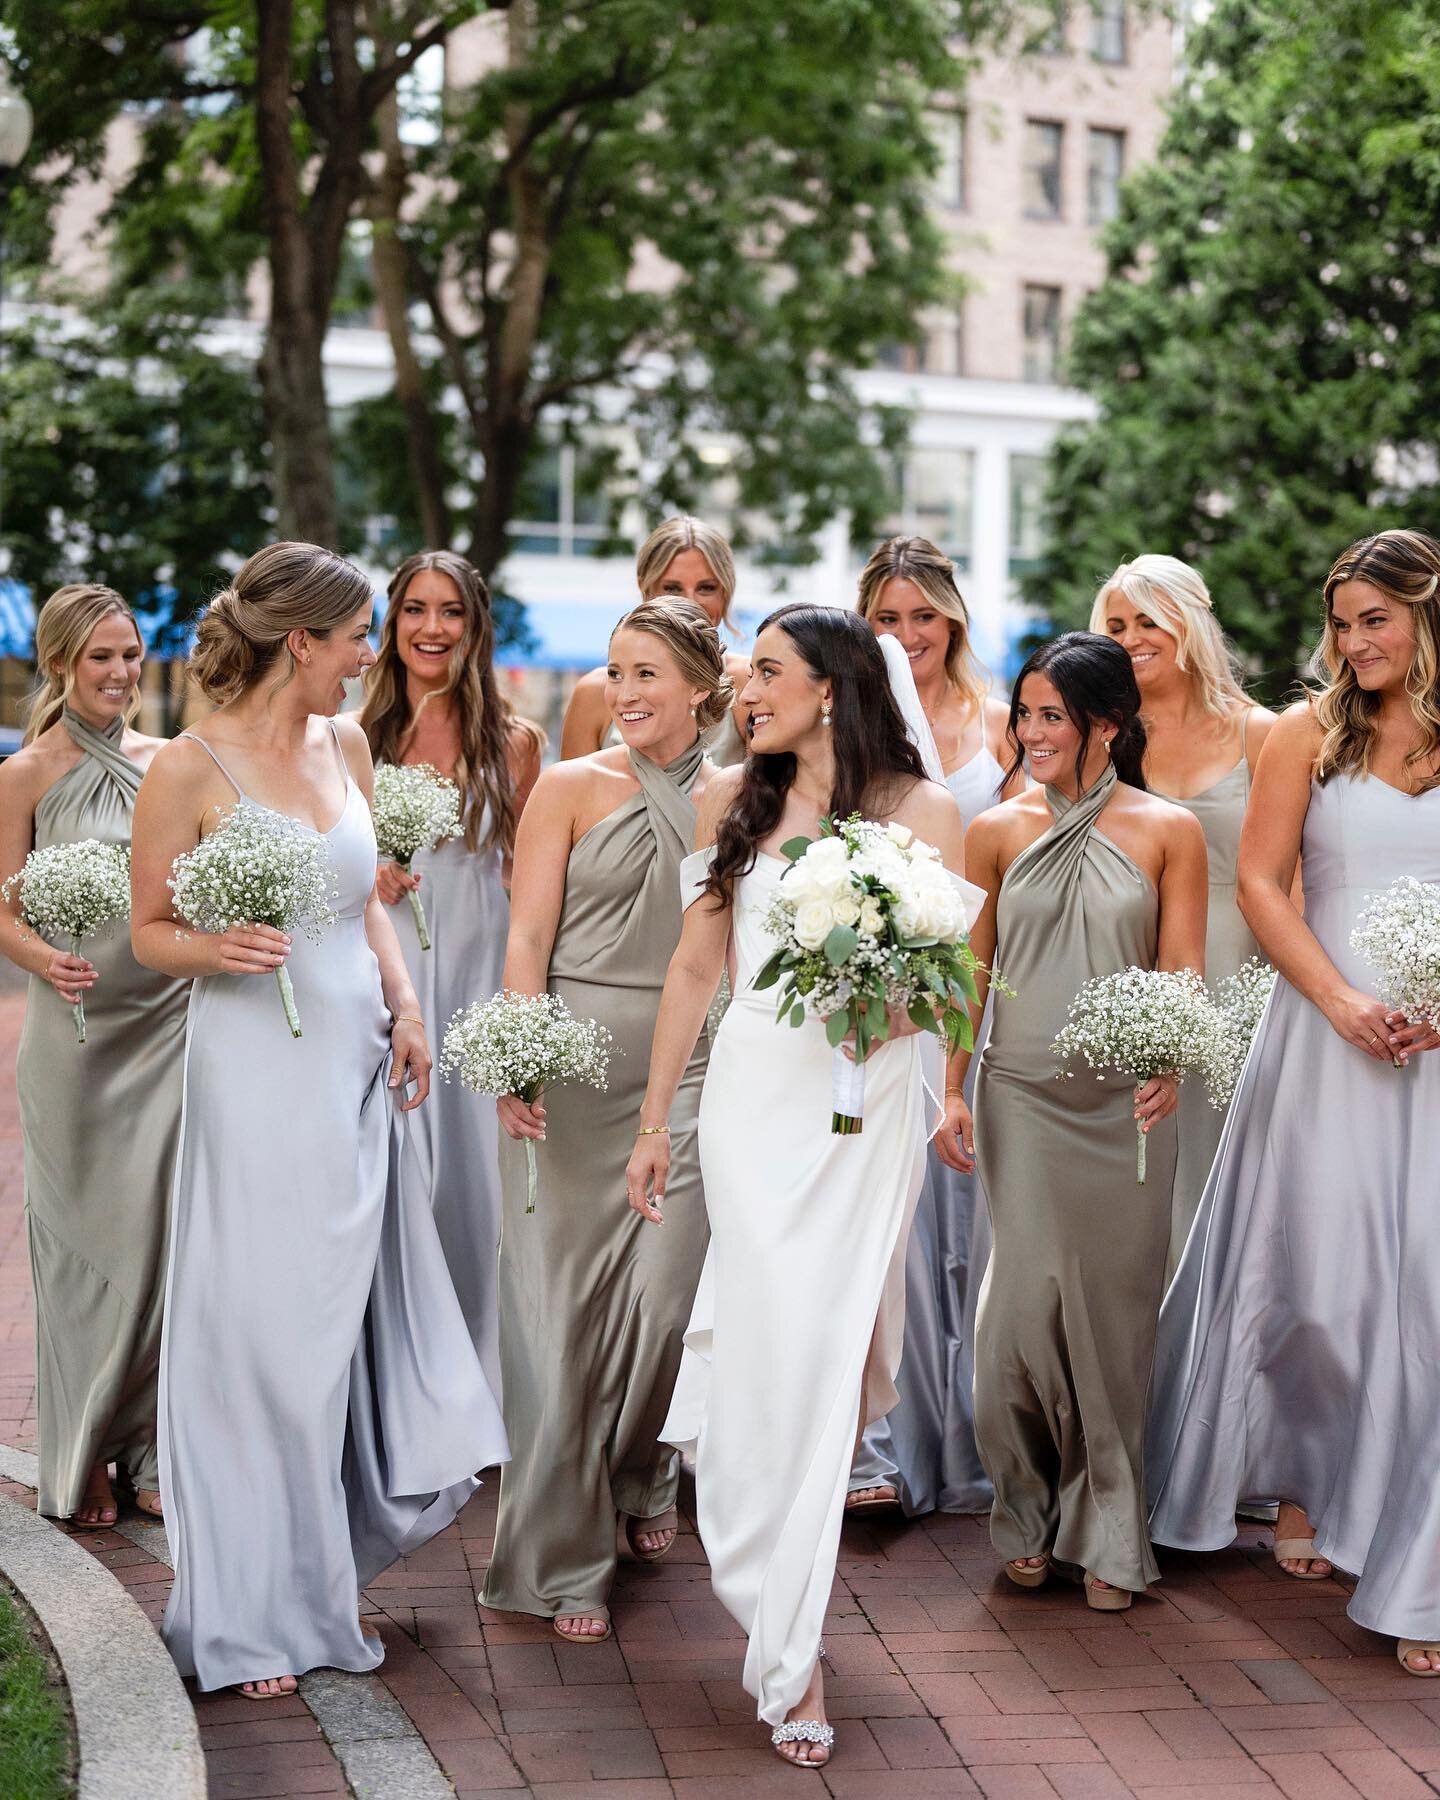 These ladies brought their glamour and fun to Yanna's day! 
Looking for inspiration? Check the color scheme Yanna chose for her bridesmaids 🤍

Bride: @yannasf 
Gown: @flairboston @jennyyoonyc 
Floral Design: @westwoodgardensflowershop 
Makeup: @thea